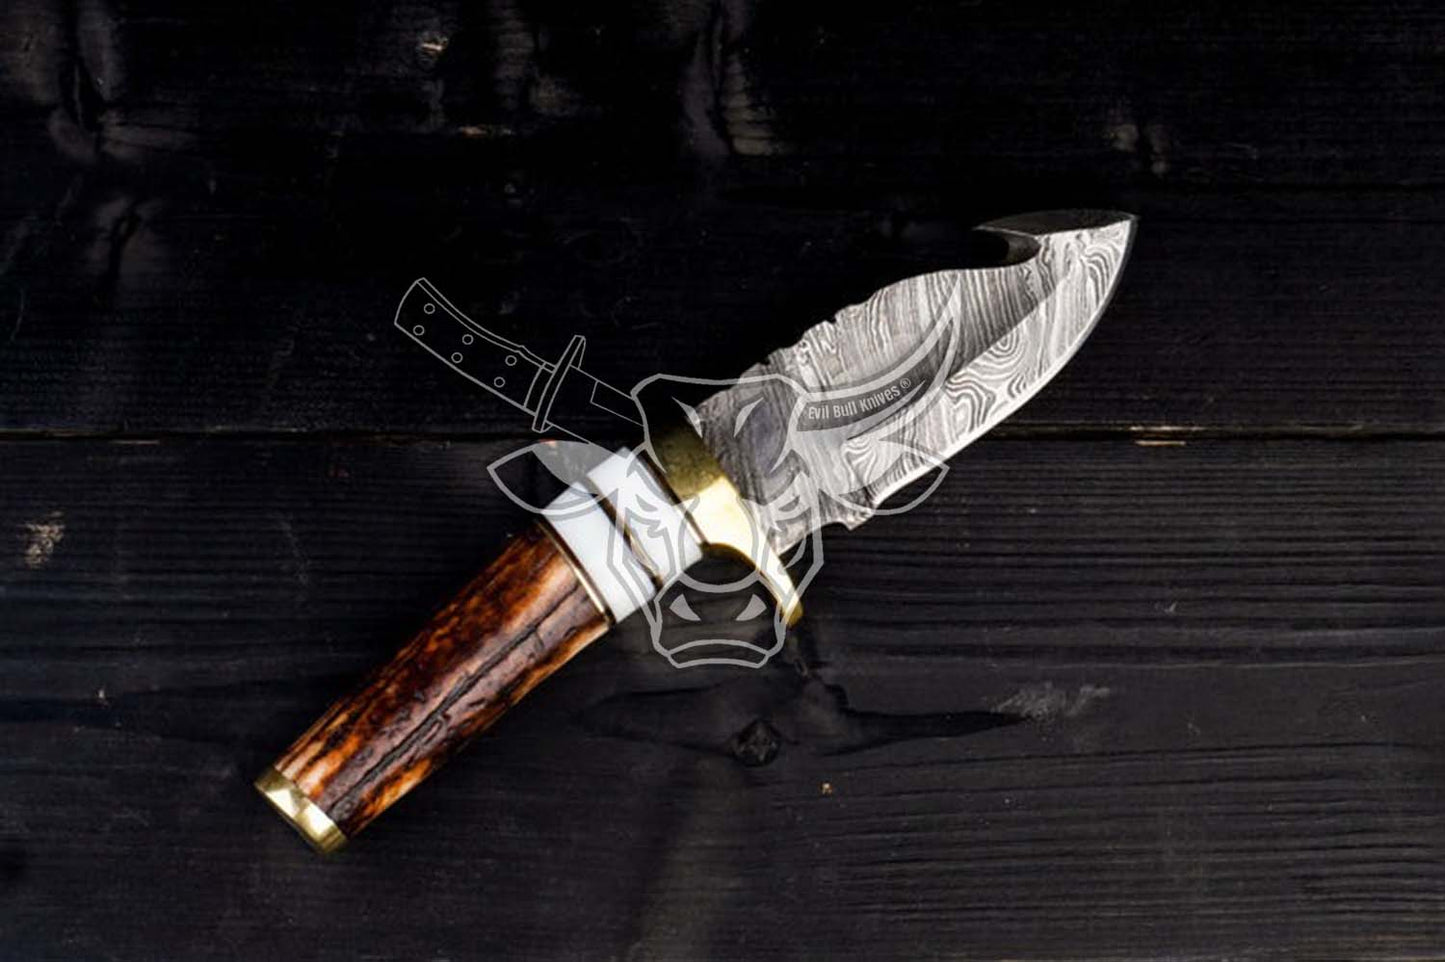 EBK-71 Hand Made Forged Damascus Steel - Knife With Hook Edge - Handle Made with Original Antler Stag Anniversary Gift For Him, Christmas Gift For Him